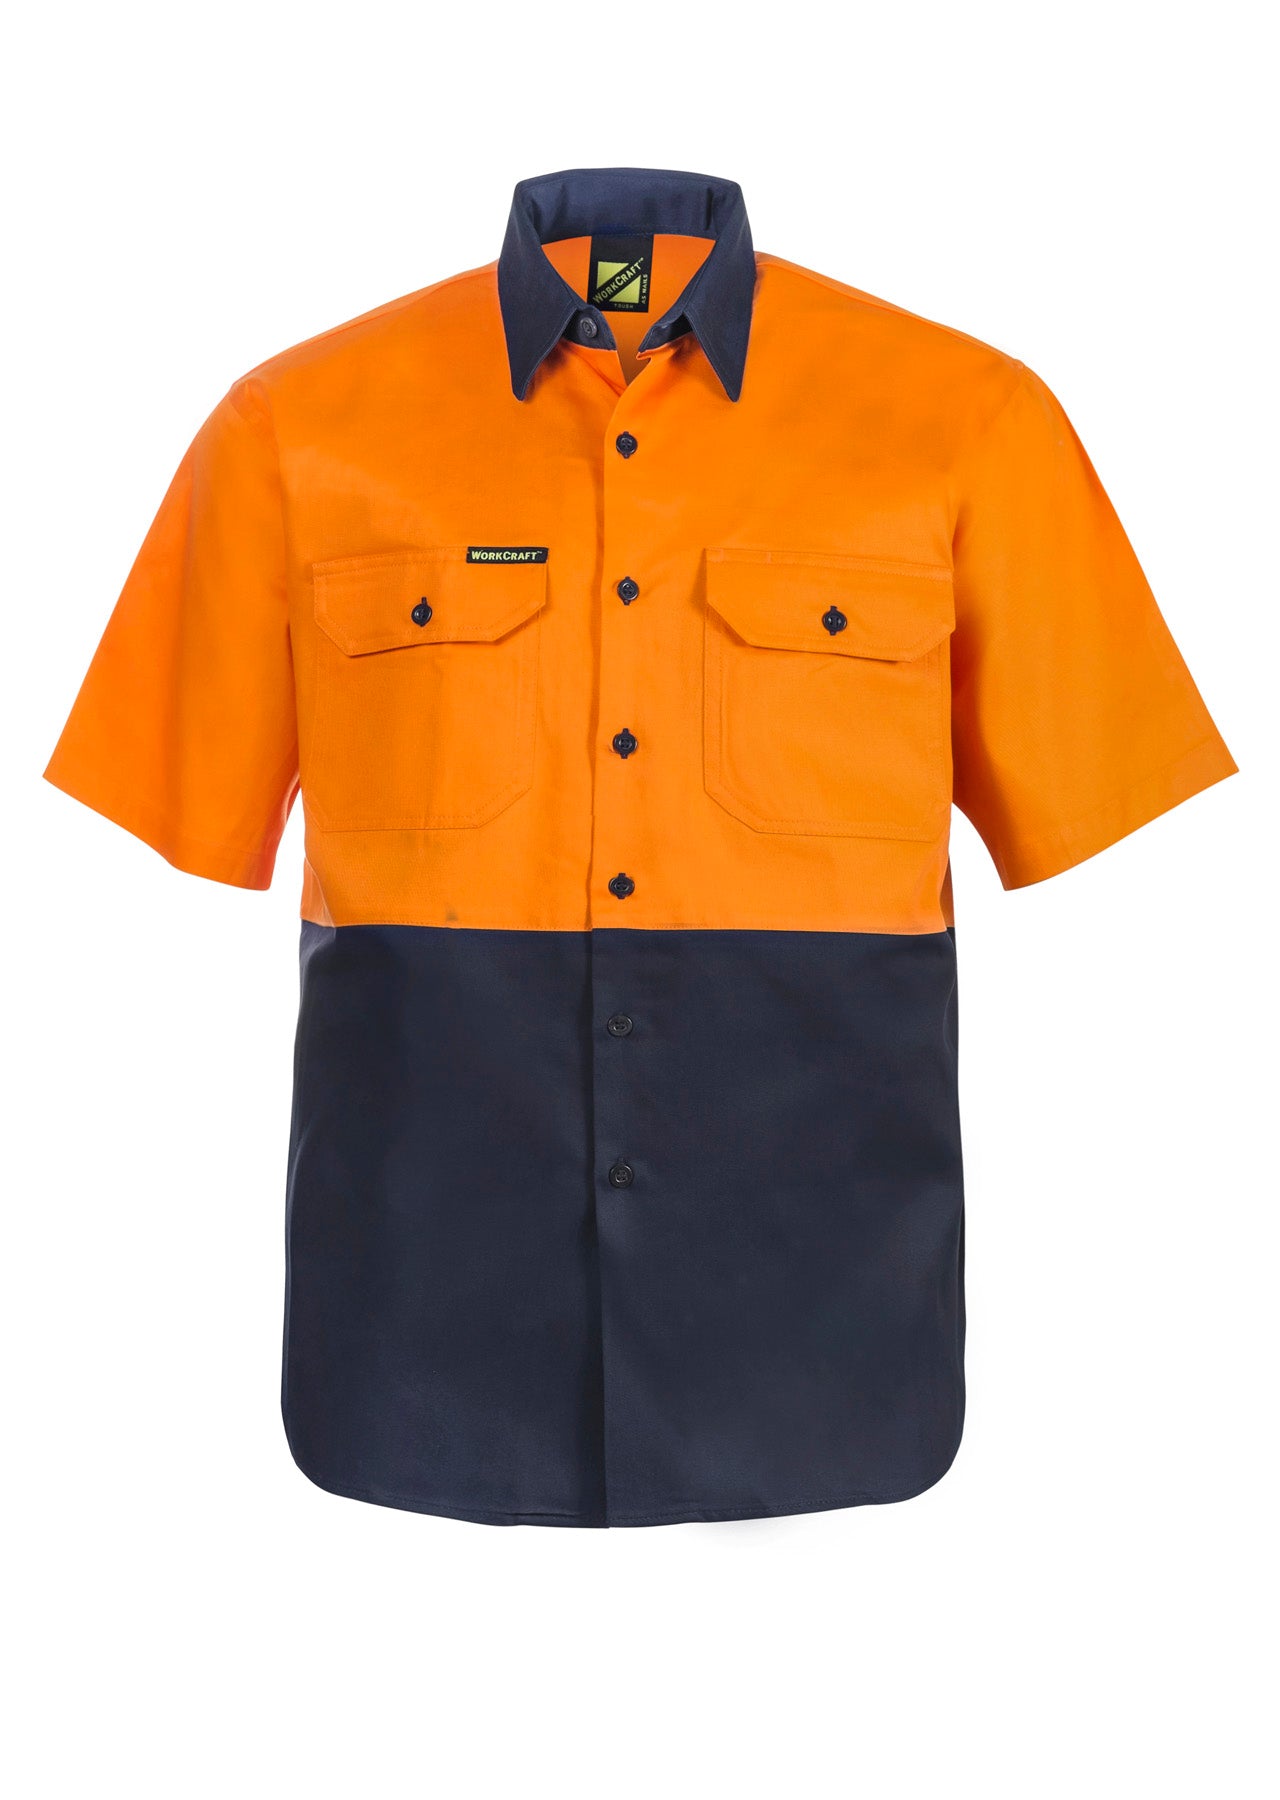 Two Tone Short Sleeve Shirt - made by Workcraft